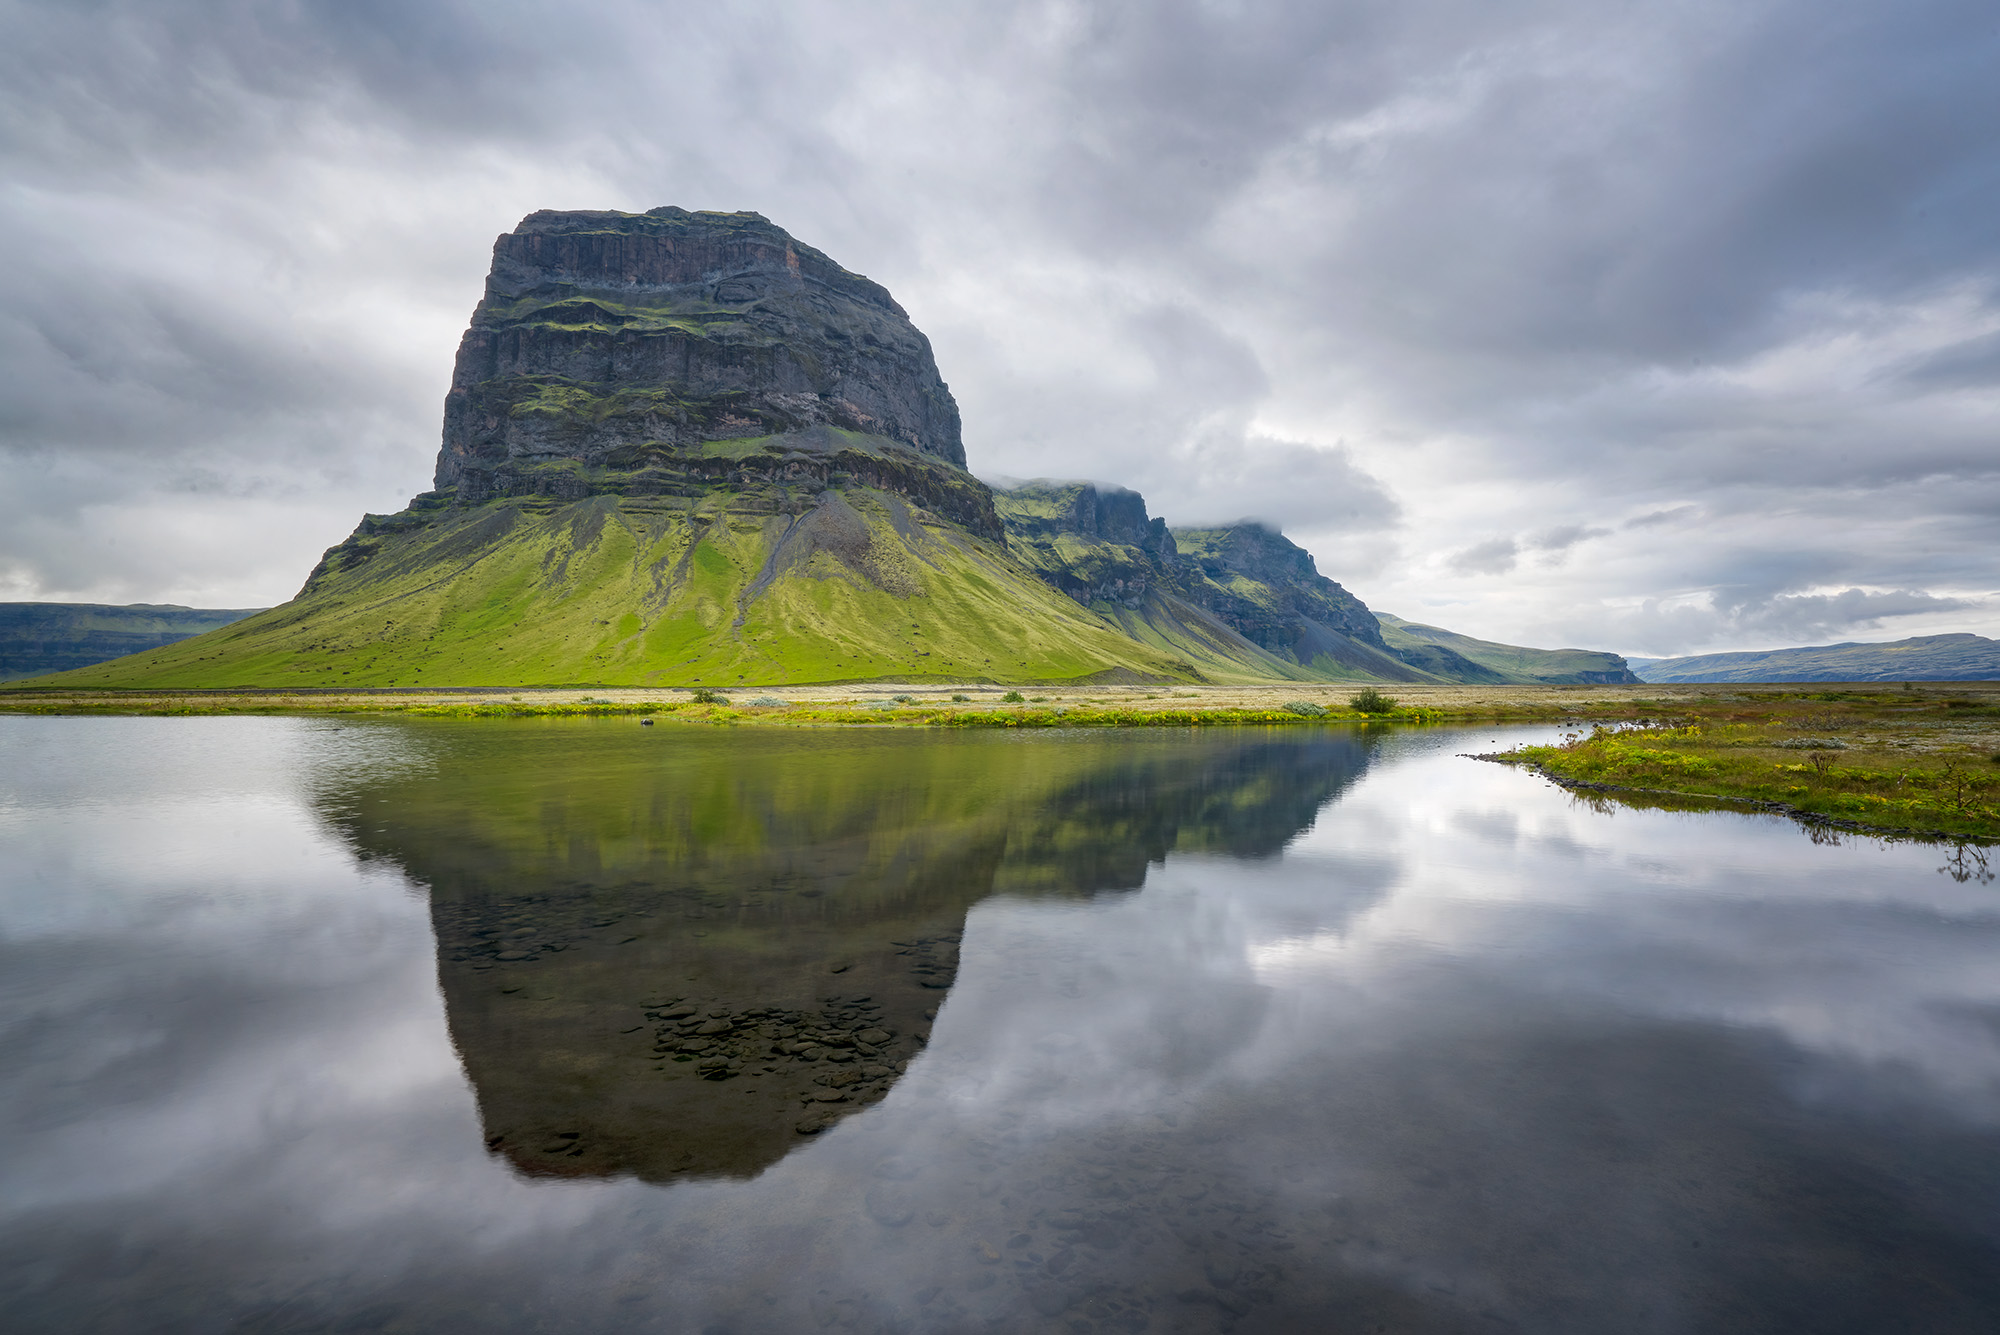 This striking image showcases Lómagnúpur, an iconic mountain in Iceland, mirrored perfectly in a tranquil reflection. Lómagn...